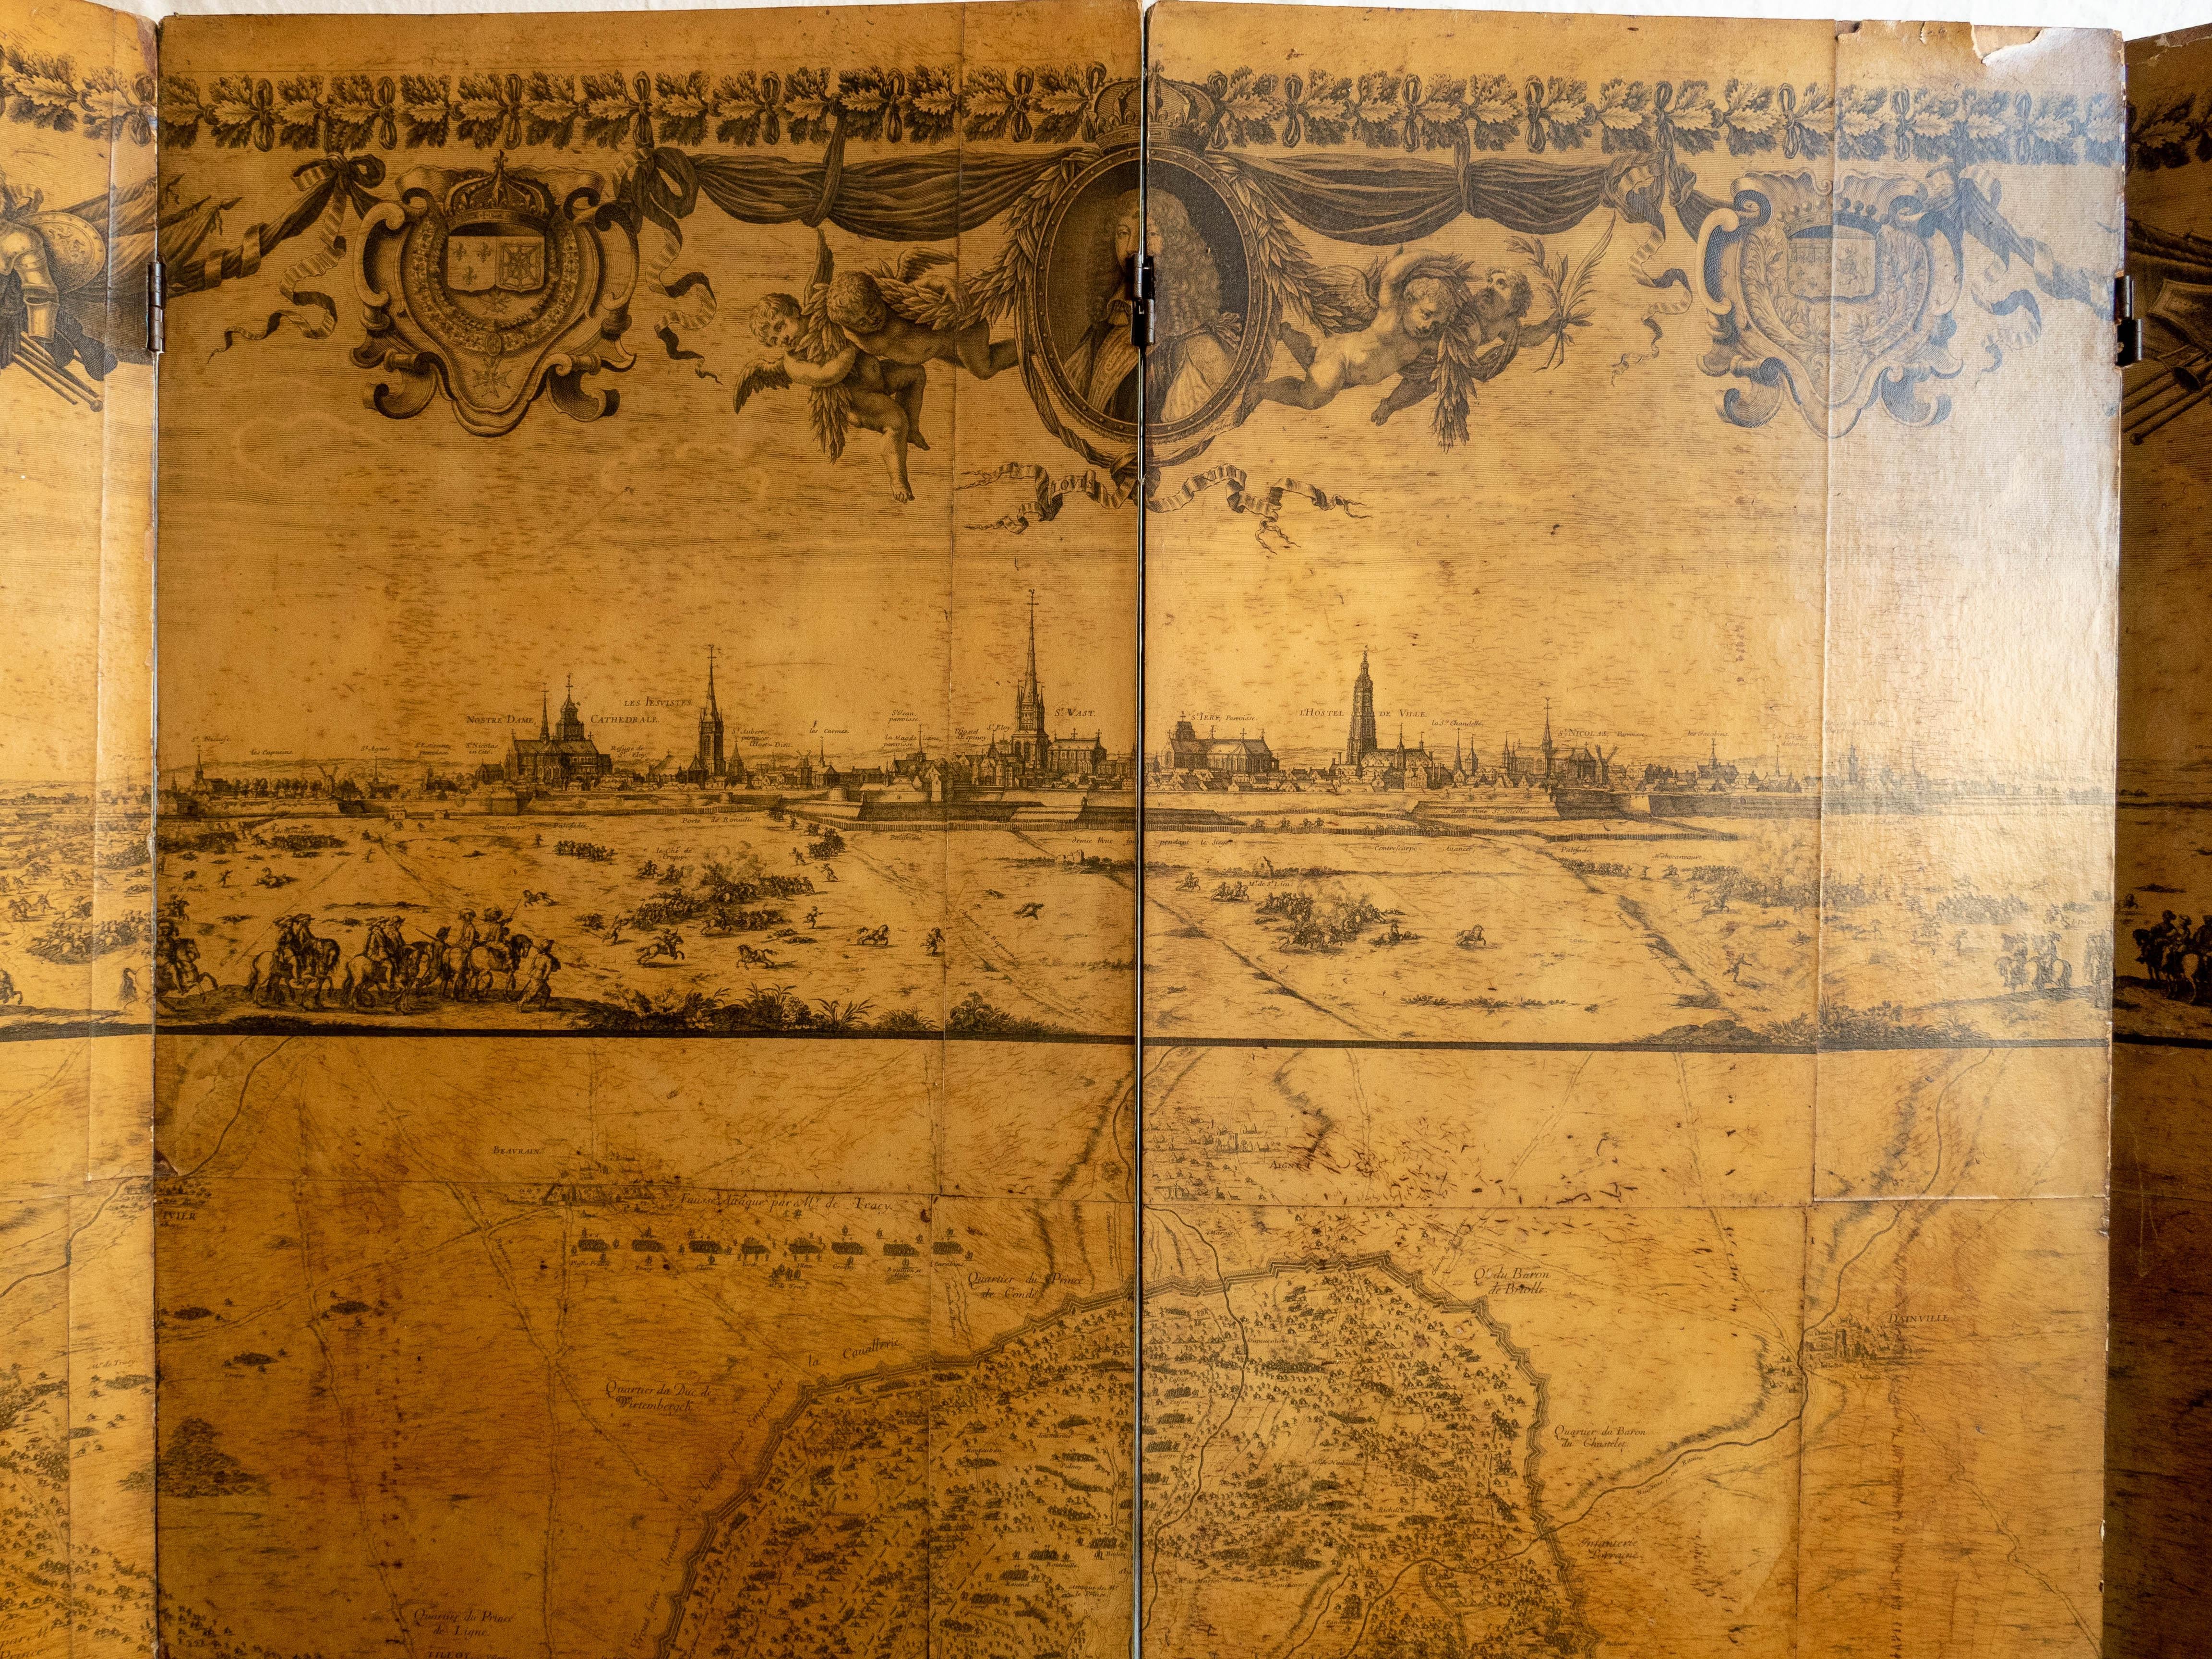 Antique Louis XIV Siege of Arras floor screen, 19th century, a four panel screen with paper lithograph laid down on wooden panels, depicting the schematic plan of battle and landscape of a decisive battle in the Franco-Spanish War during the reign